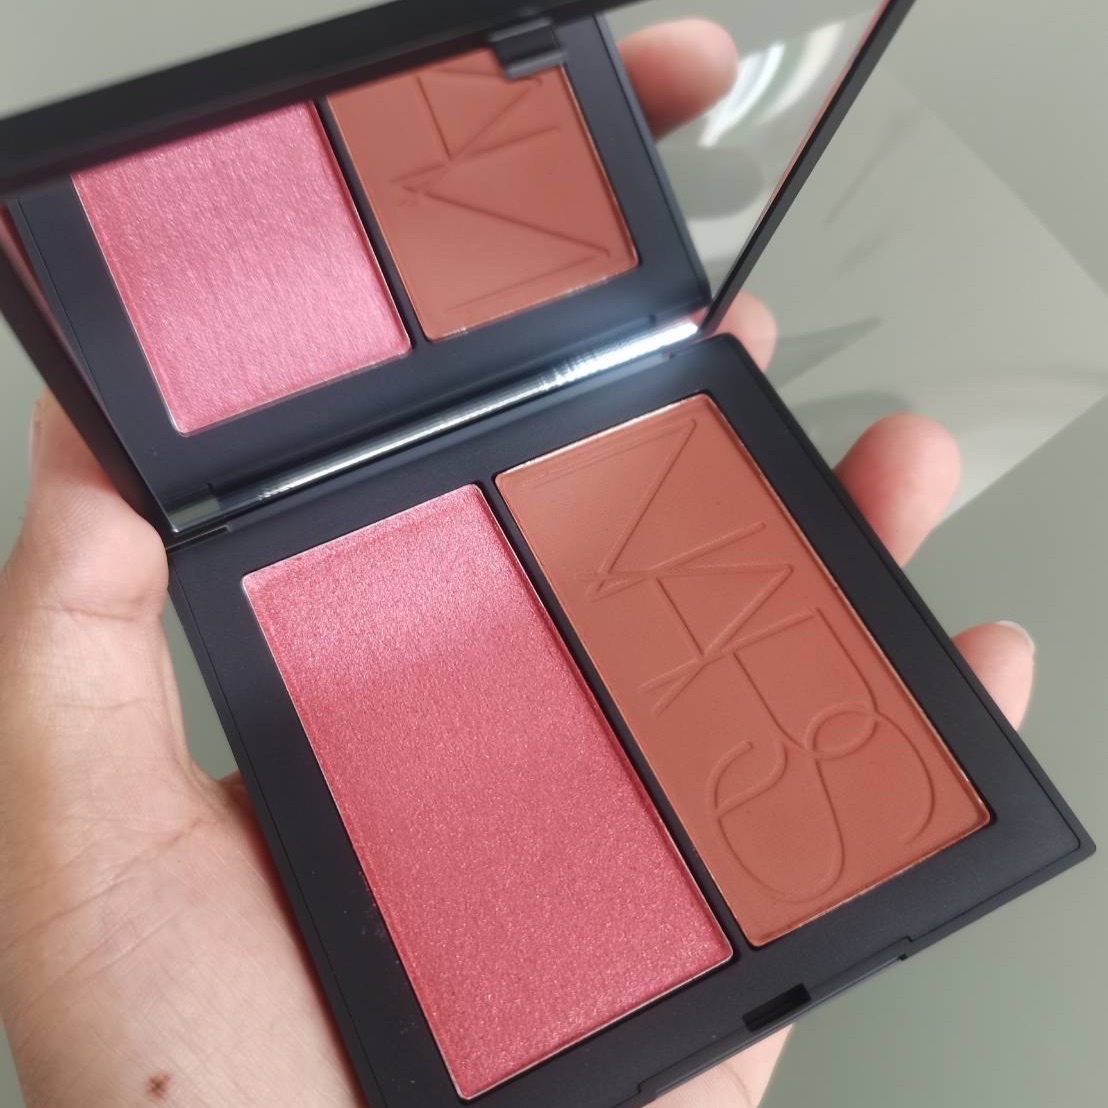 Nars Summer Unrated Blush Duo ขนาด 9g 9 5g บลัช Summer Unrated Blush Duo Dominate Cyprus